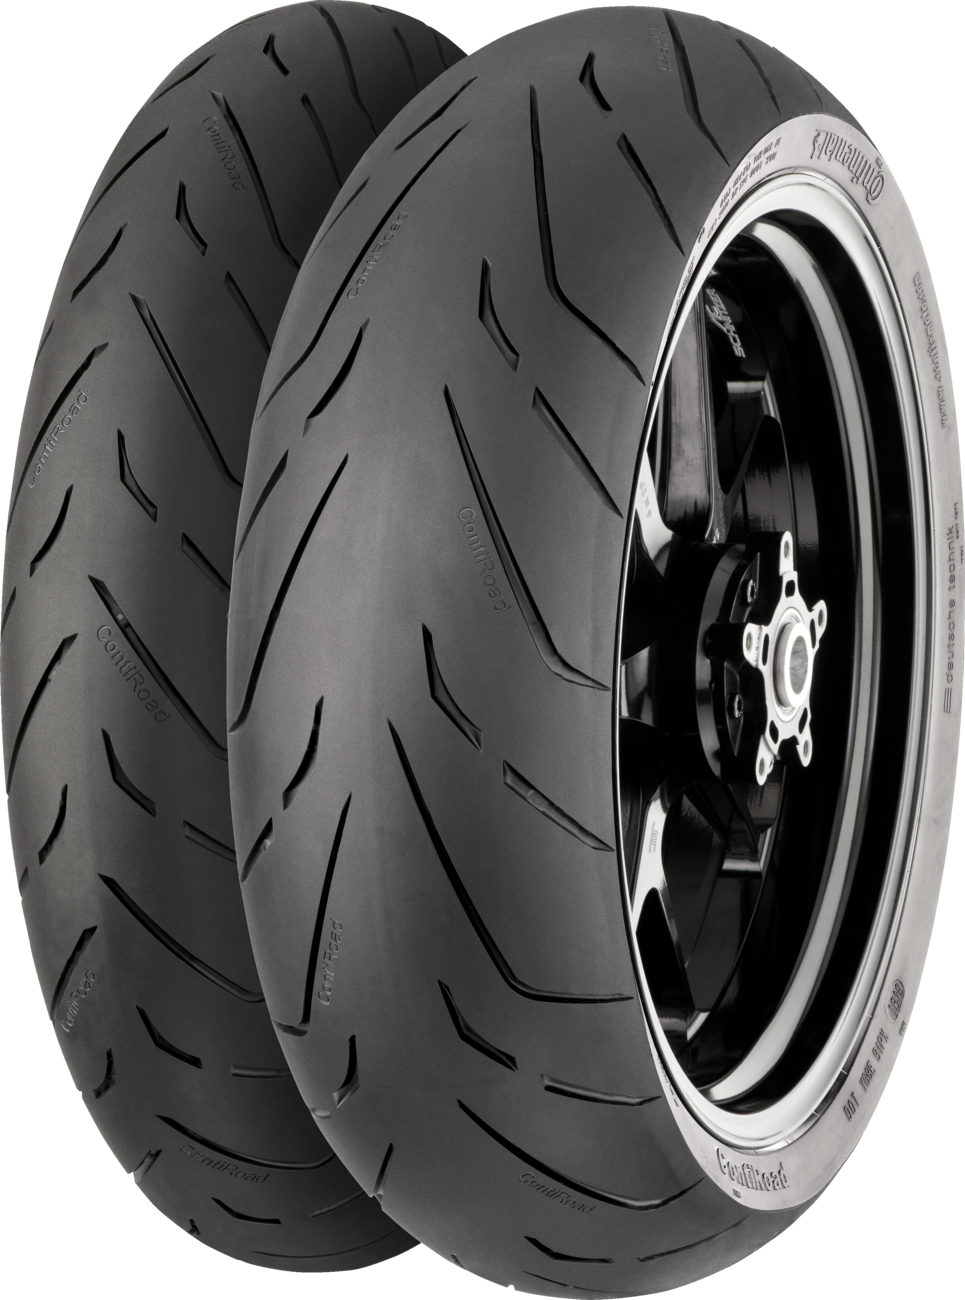 Tire - ContiRoad - Front - 120/70ZR17 - (58W)